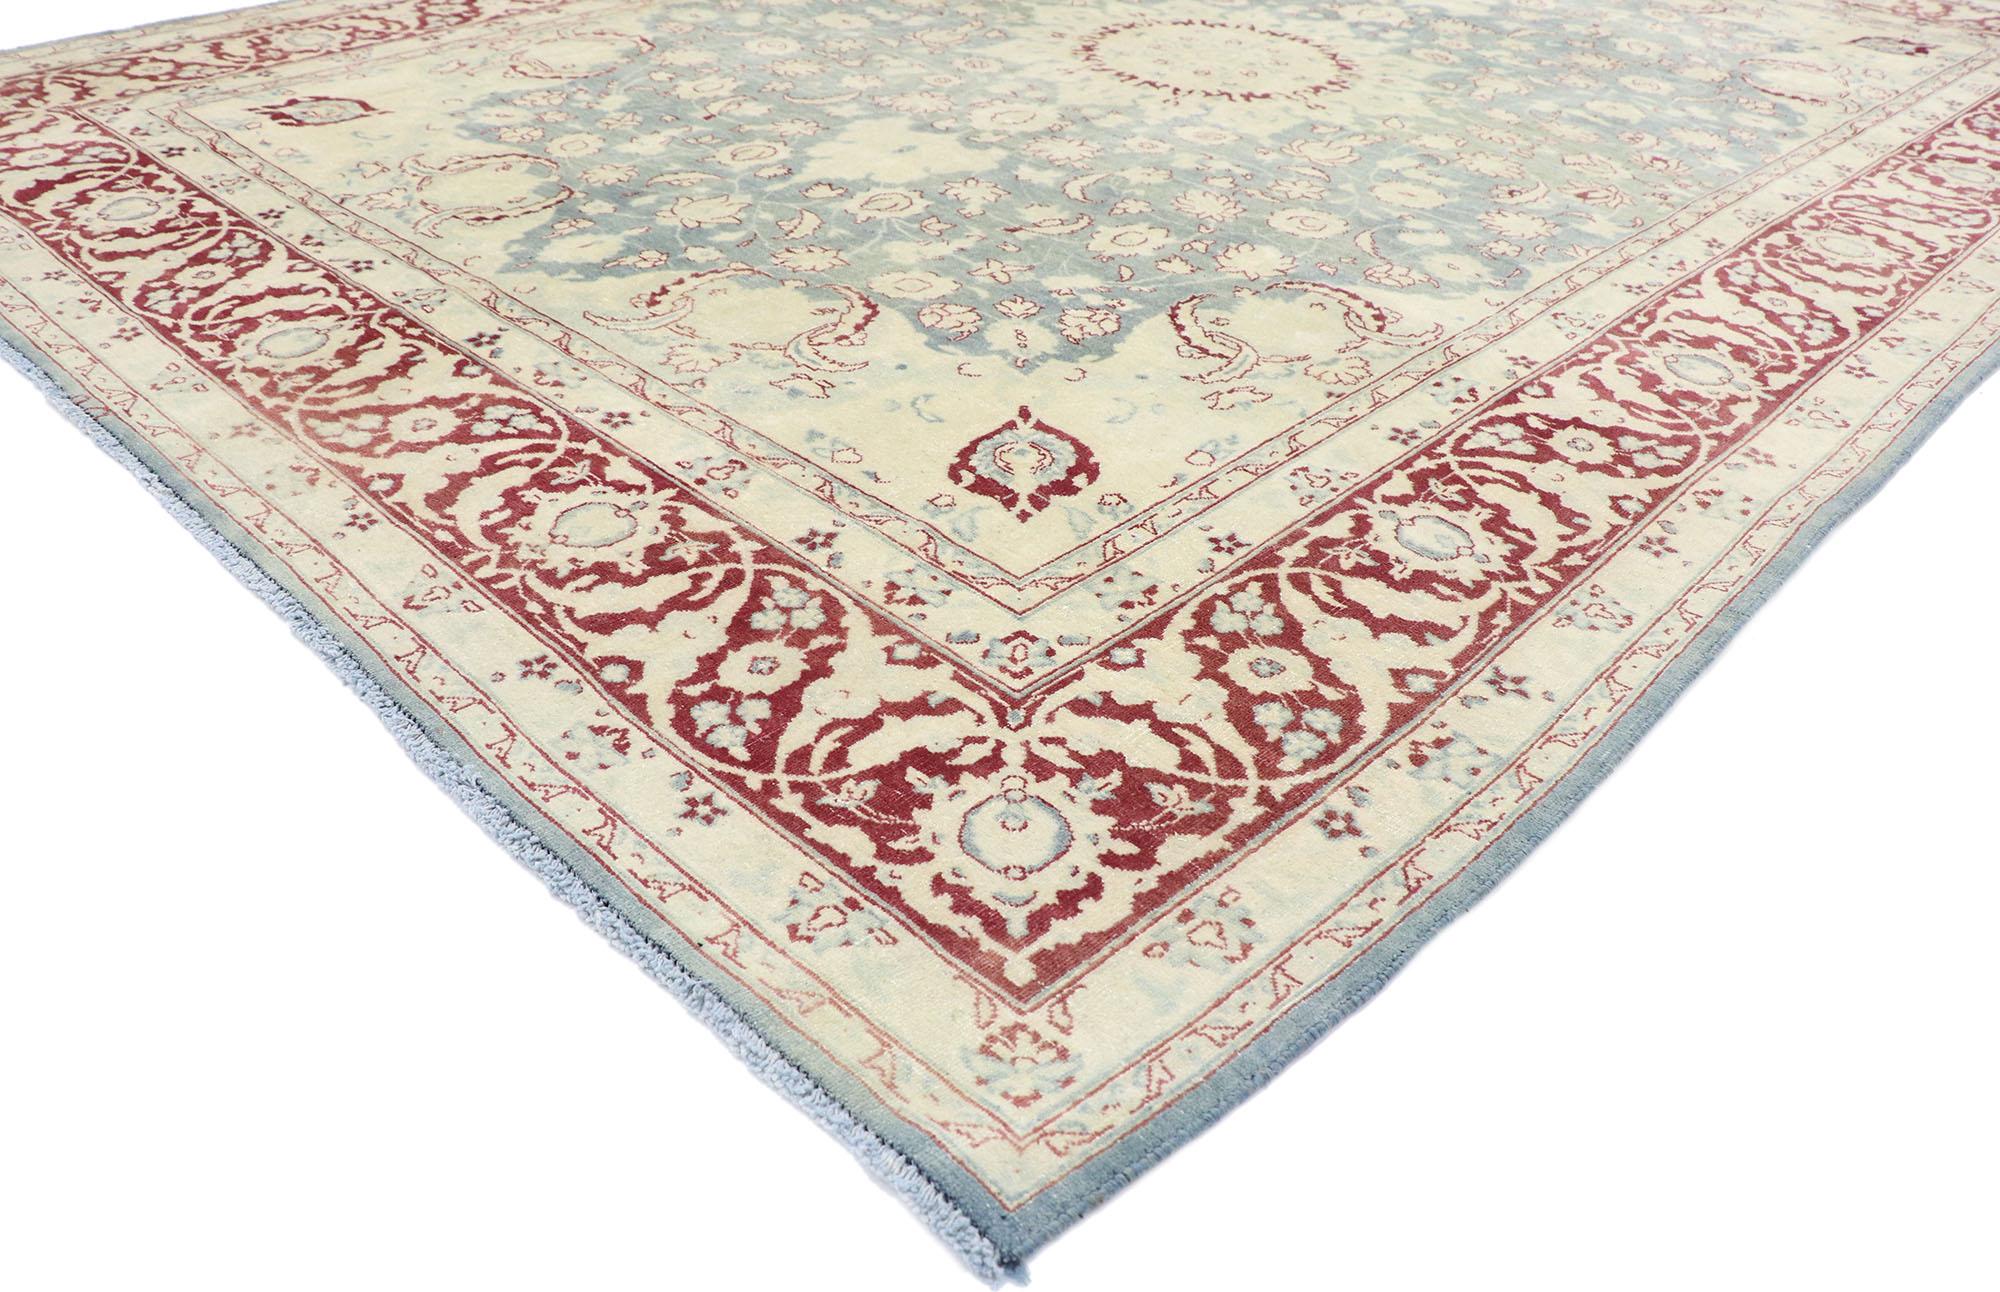 60874 Distressed Antique Persian Tabriz rug with Modern Rustic English style 07'11 x 10'09. With ornate details and a lovingly time-worn composition, this hand knotted wool distressed antique Persian Tabriz rug is poised to impress. Taking center